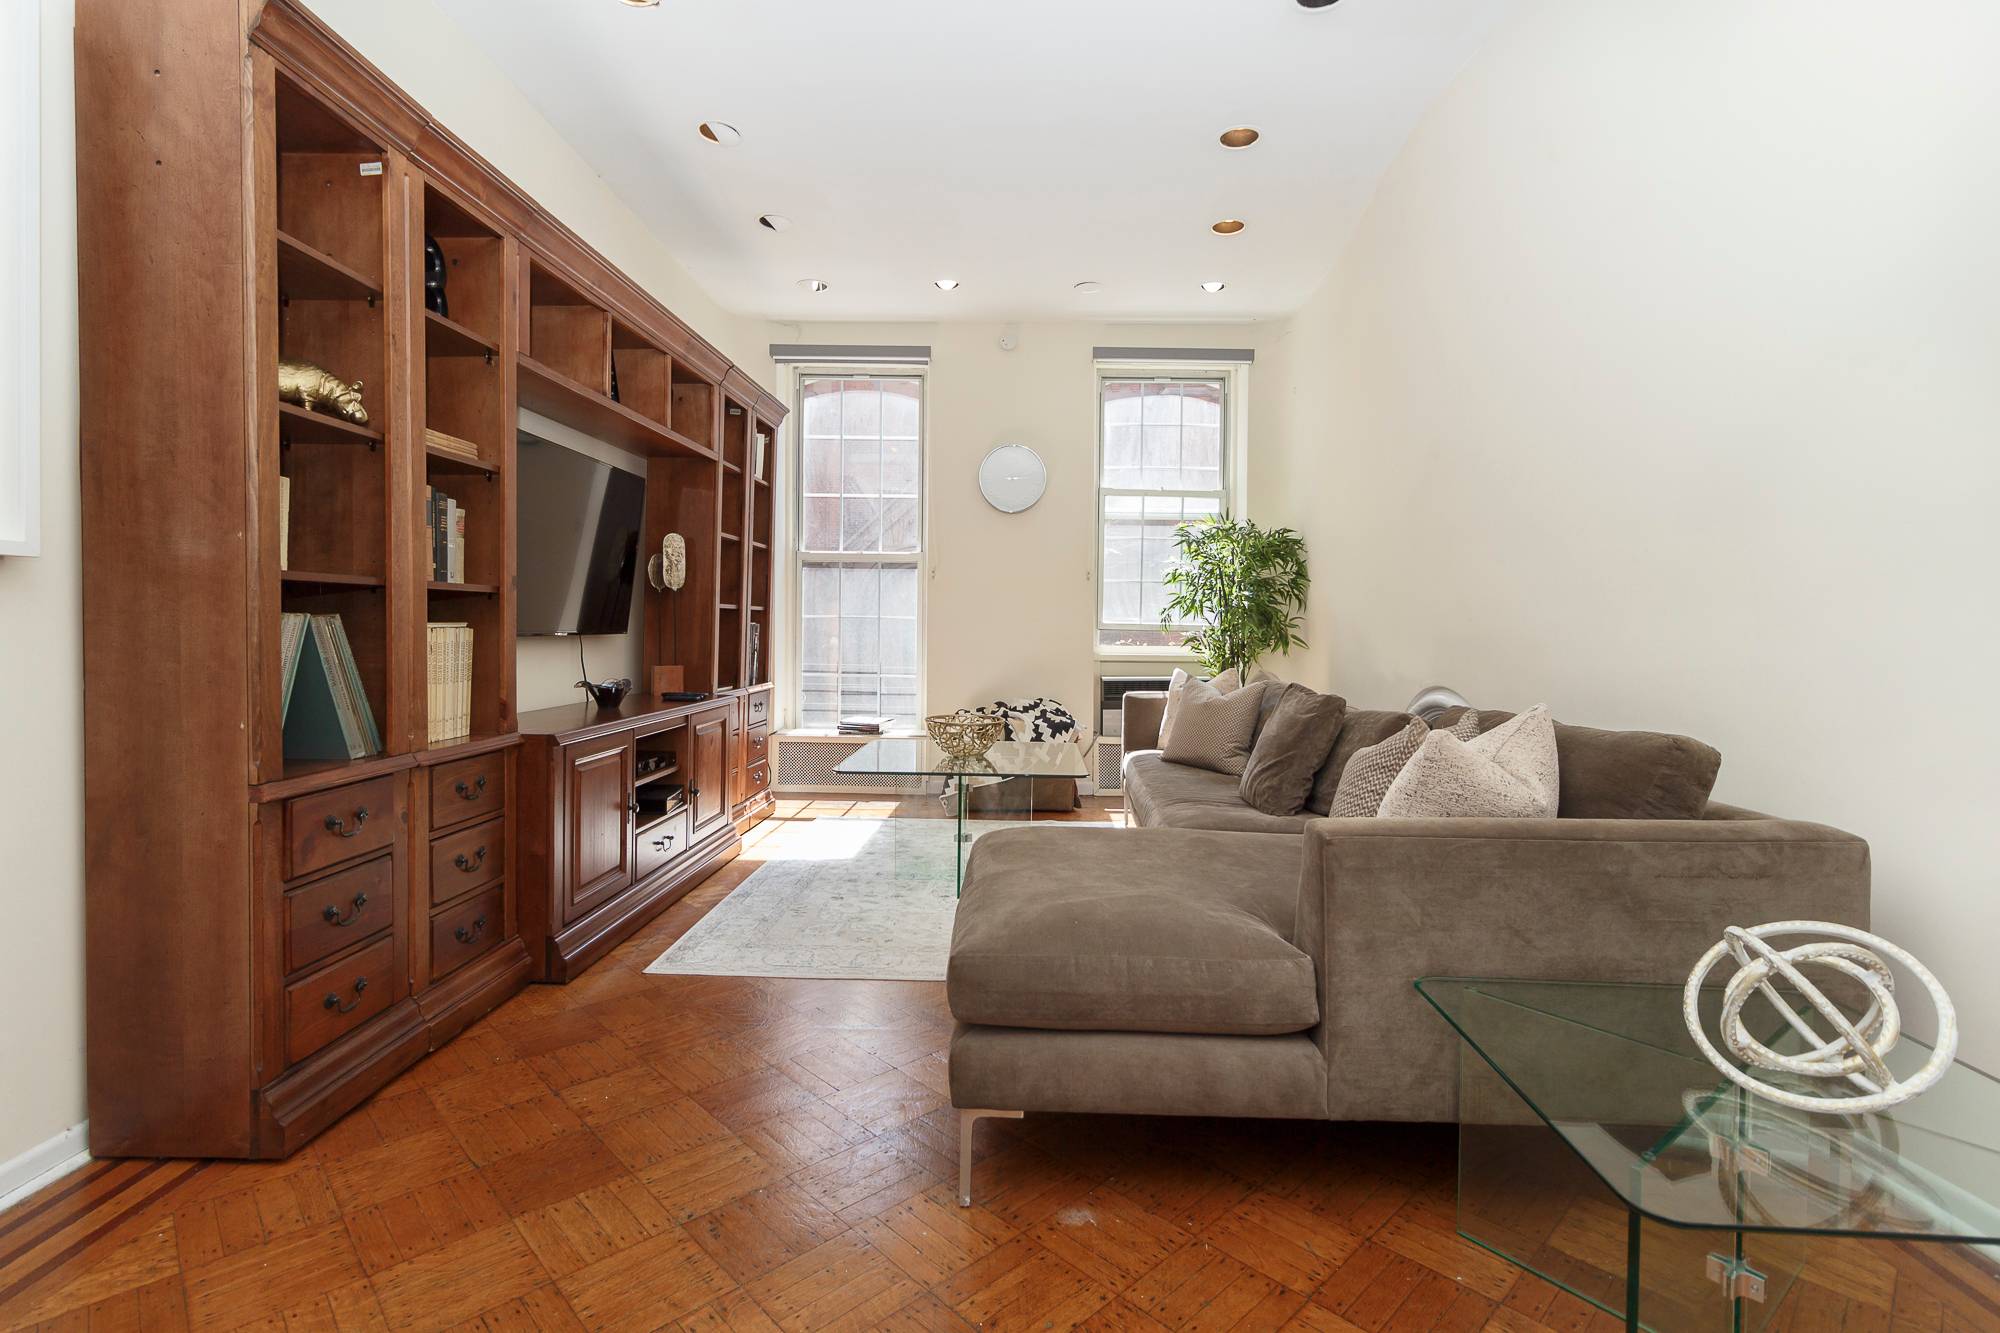 151 East 29th Street is a renovated single family home with professional space located in a prime, centrally located neighborhood with private parking.